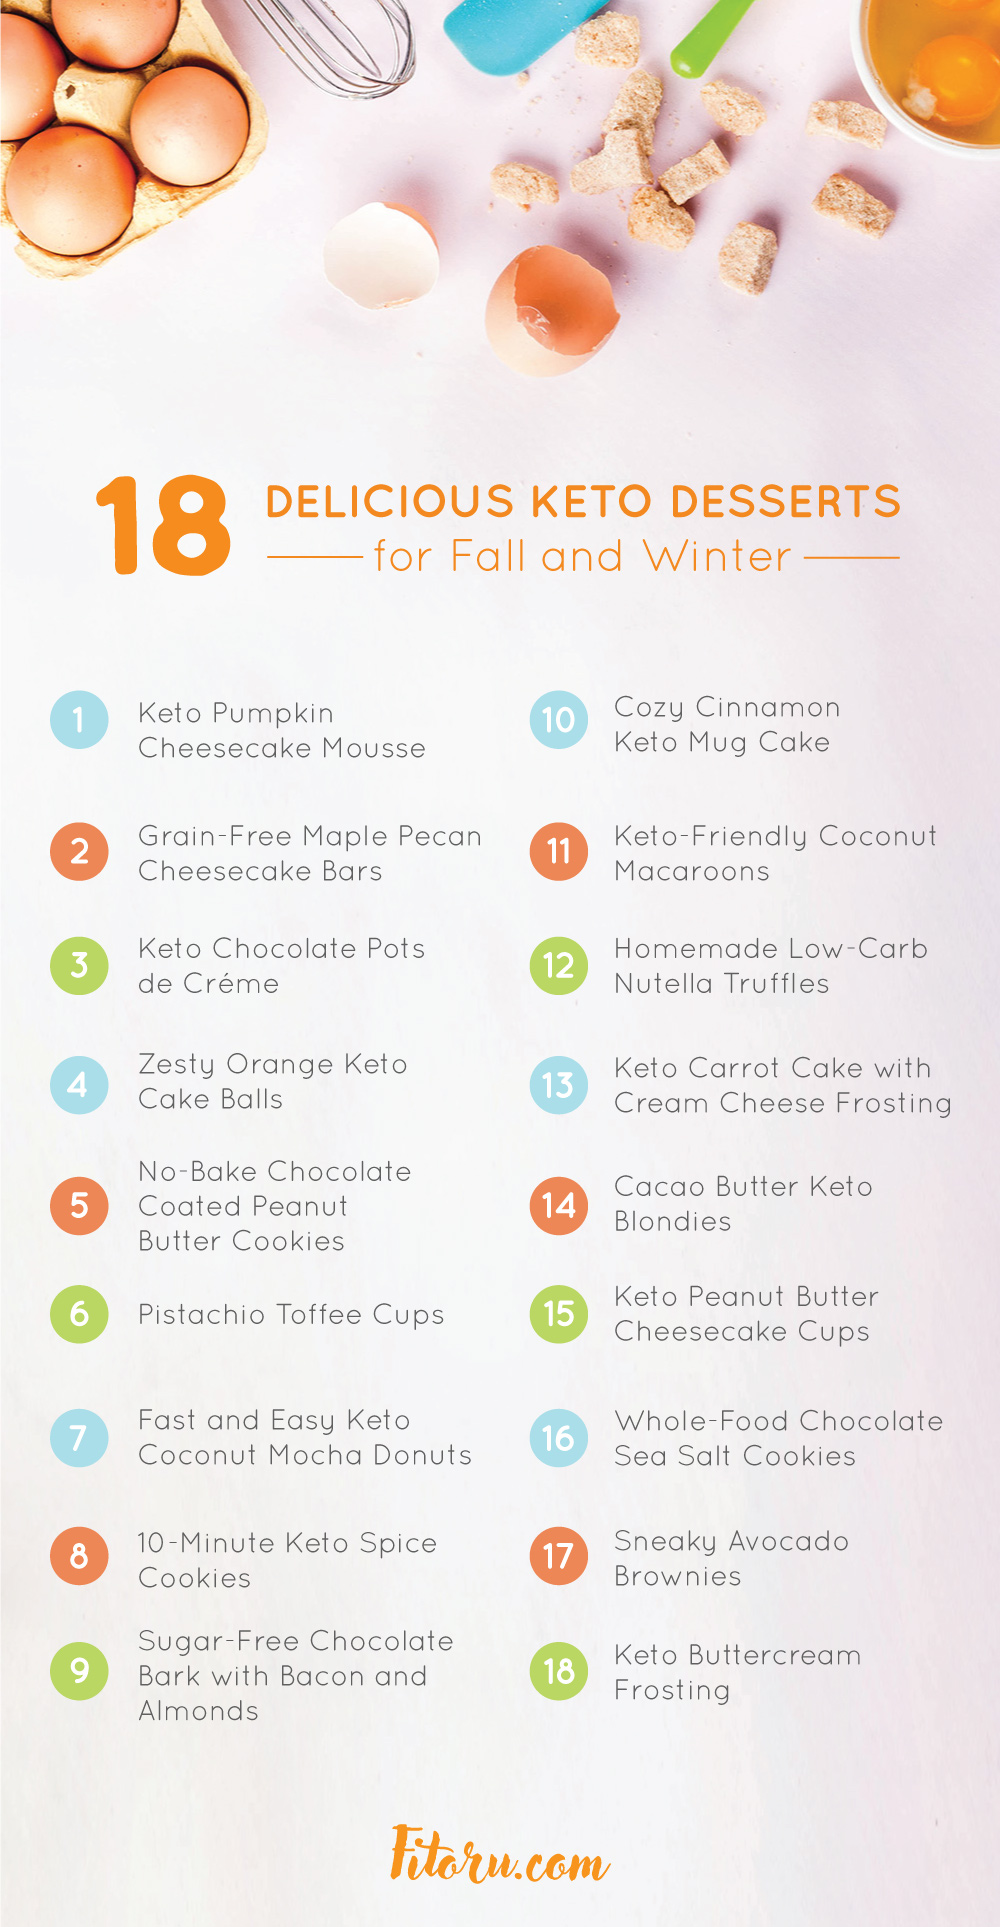 Here are 18 delicious keto desserts for fall and winter.